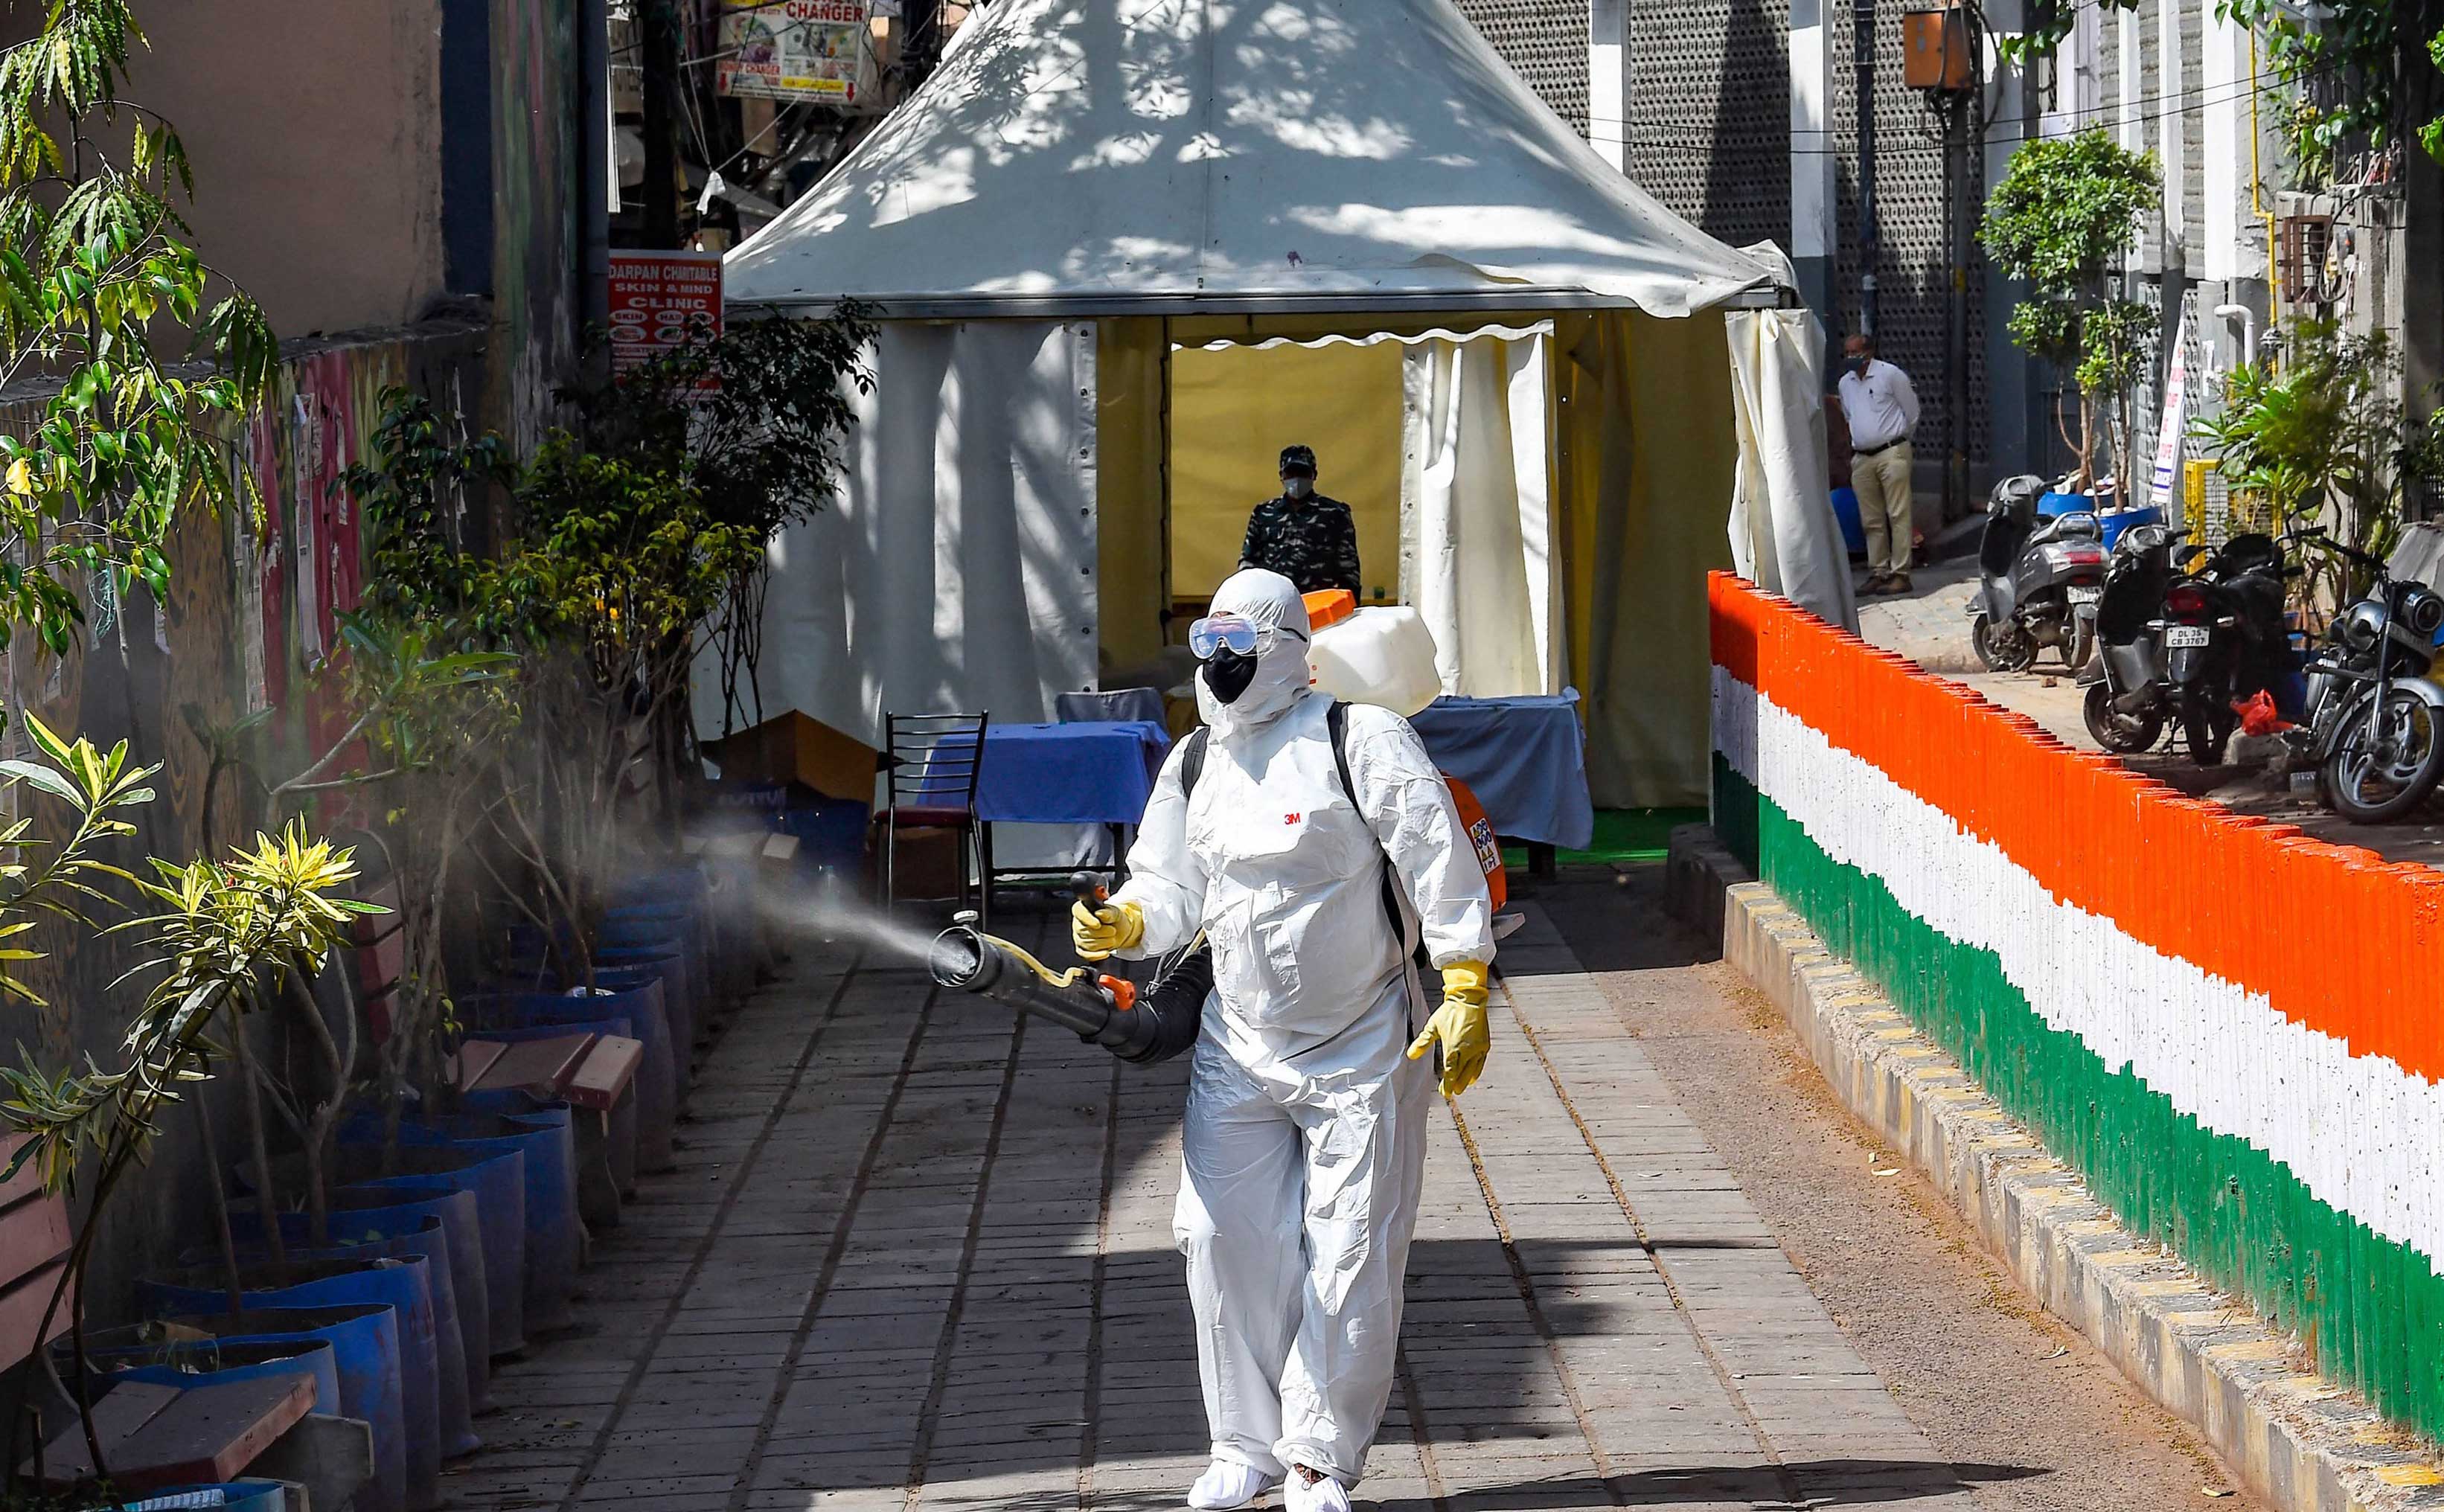 A health worker sanitises an area near Nizamuddin mosque, after people who attended the religious congregation at Tabligh-e-Jamaats Markaz, tested postive for COVID-19, in New Delhi